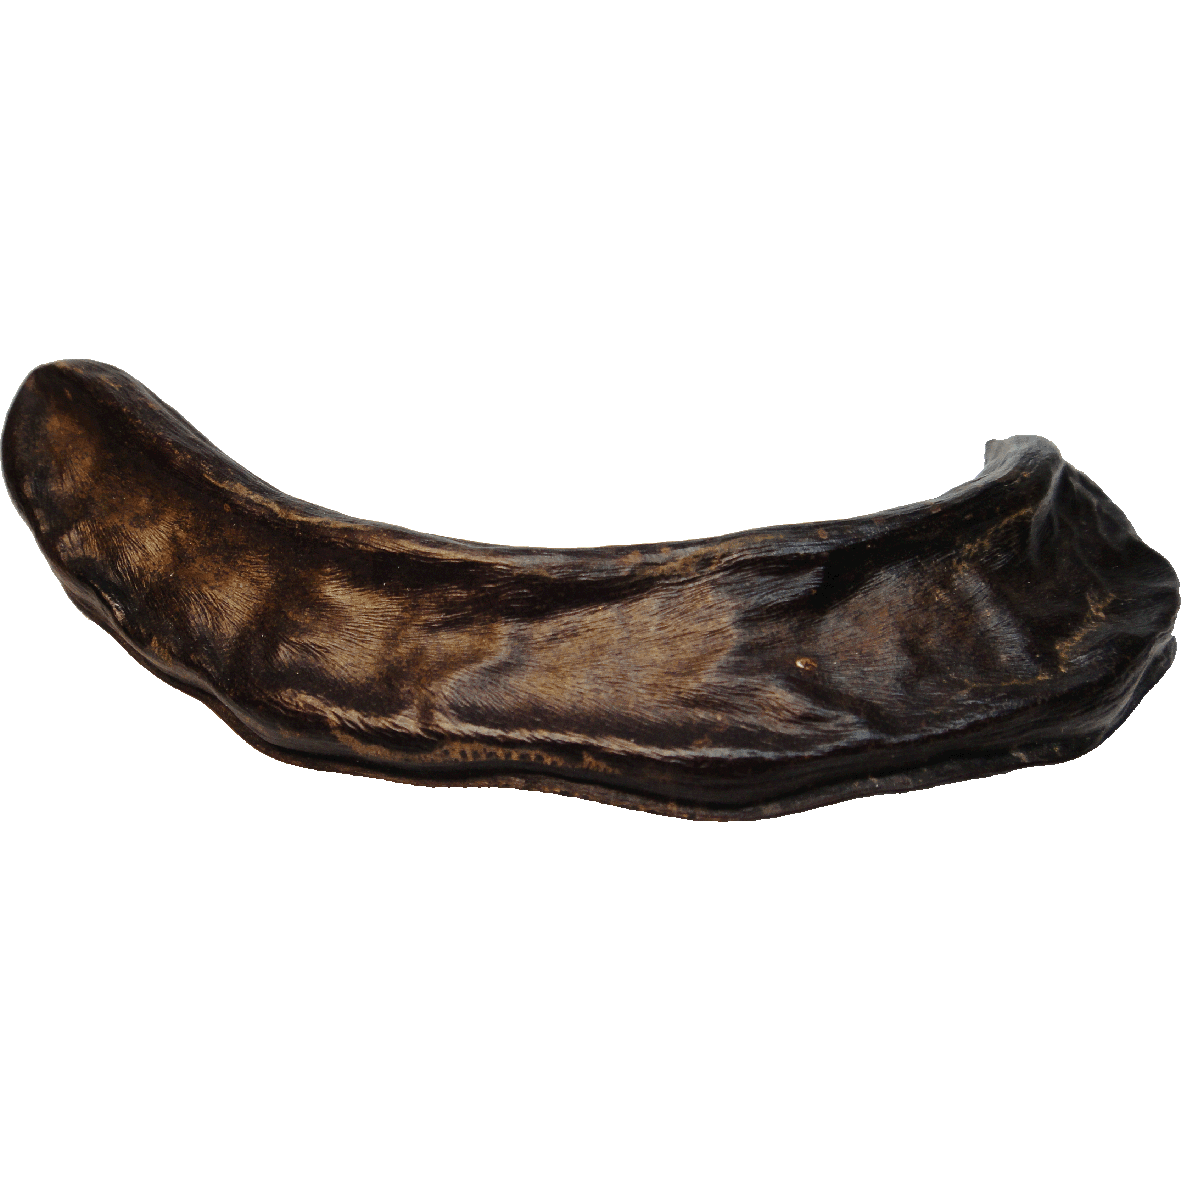 Mediterranean and Western Asia, Pod of the Carob Tree (obverse)